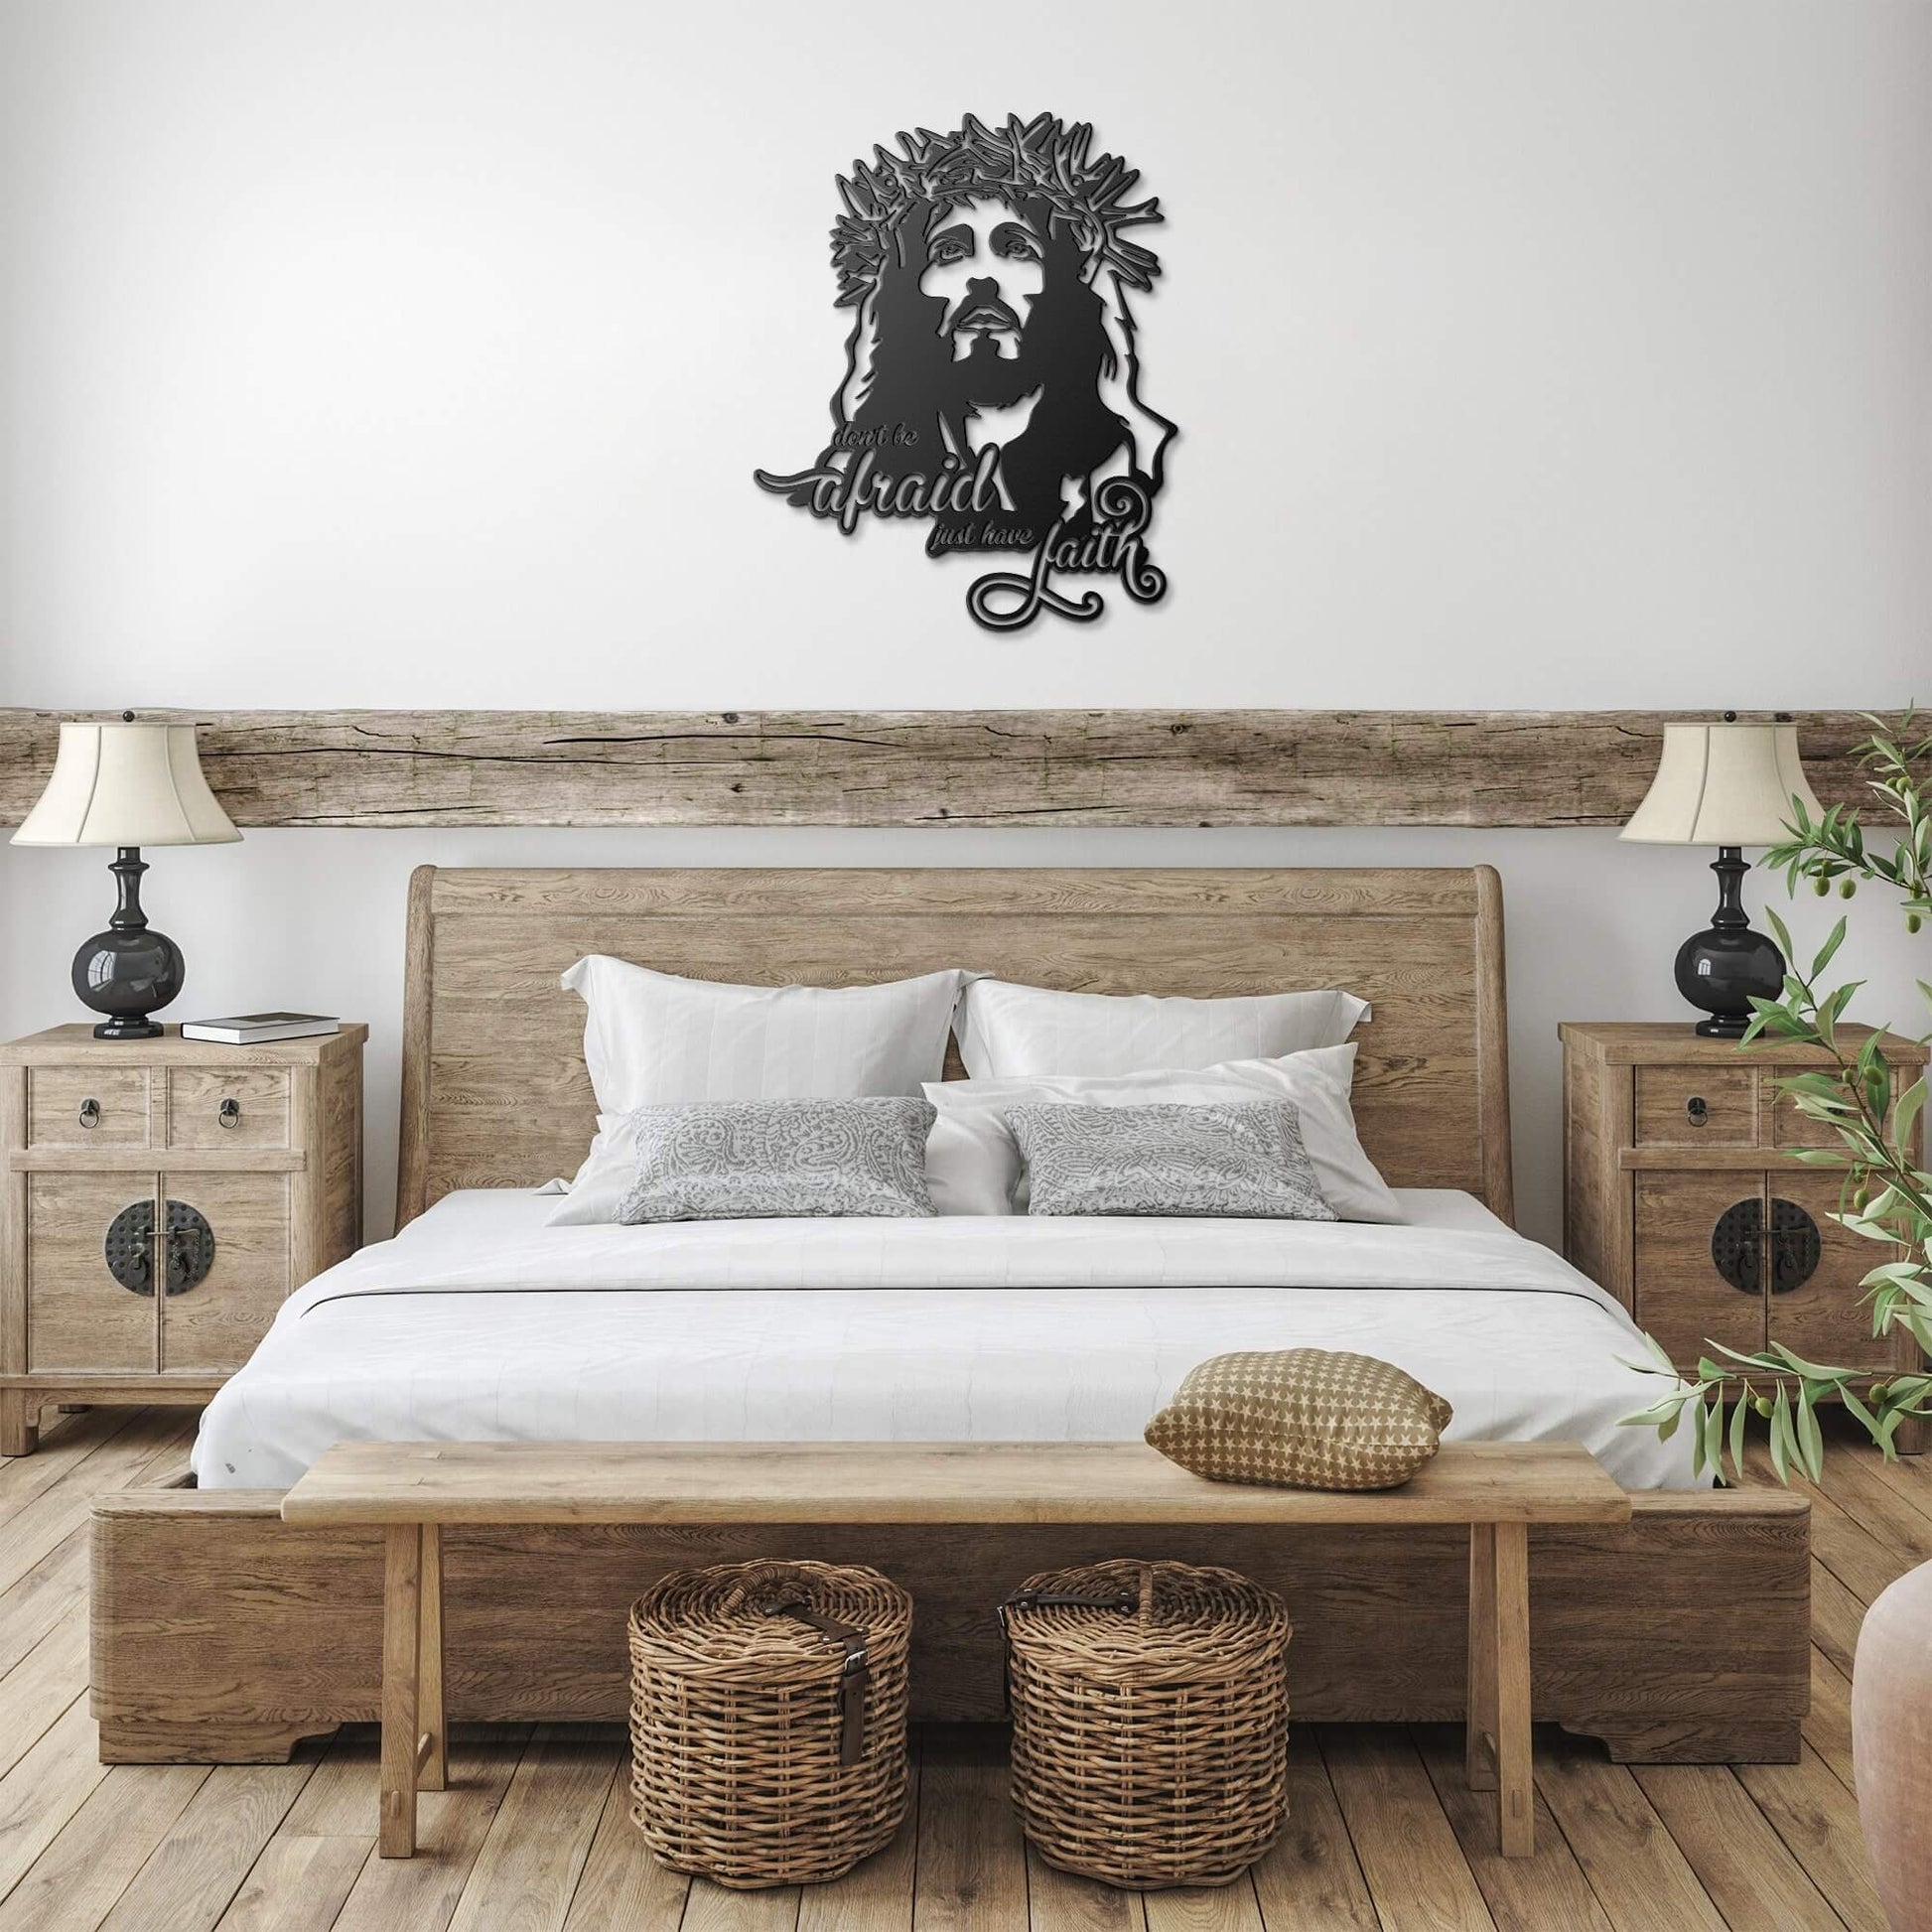 Don't Be Afraid Just Have Faith Metal Sign - Christian Metal Wall Art - Religious Metal Wall Decor